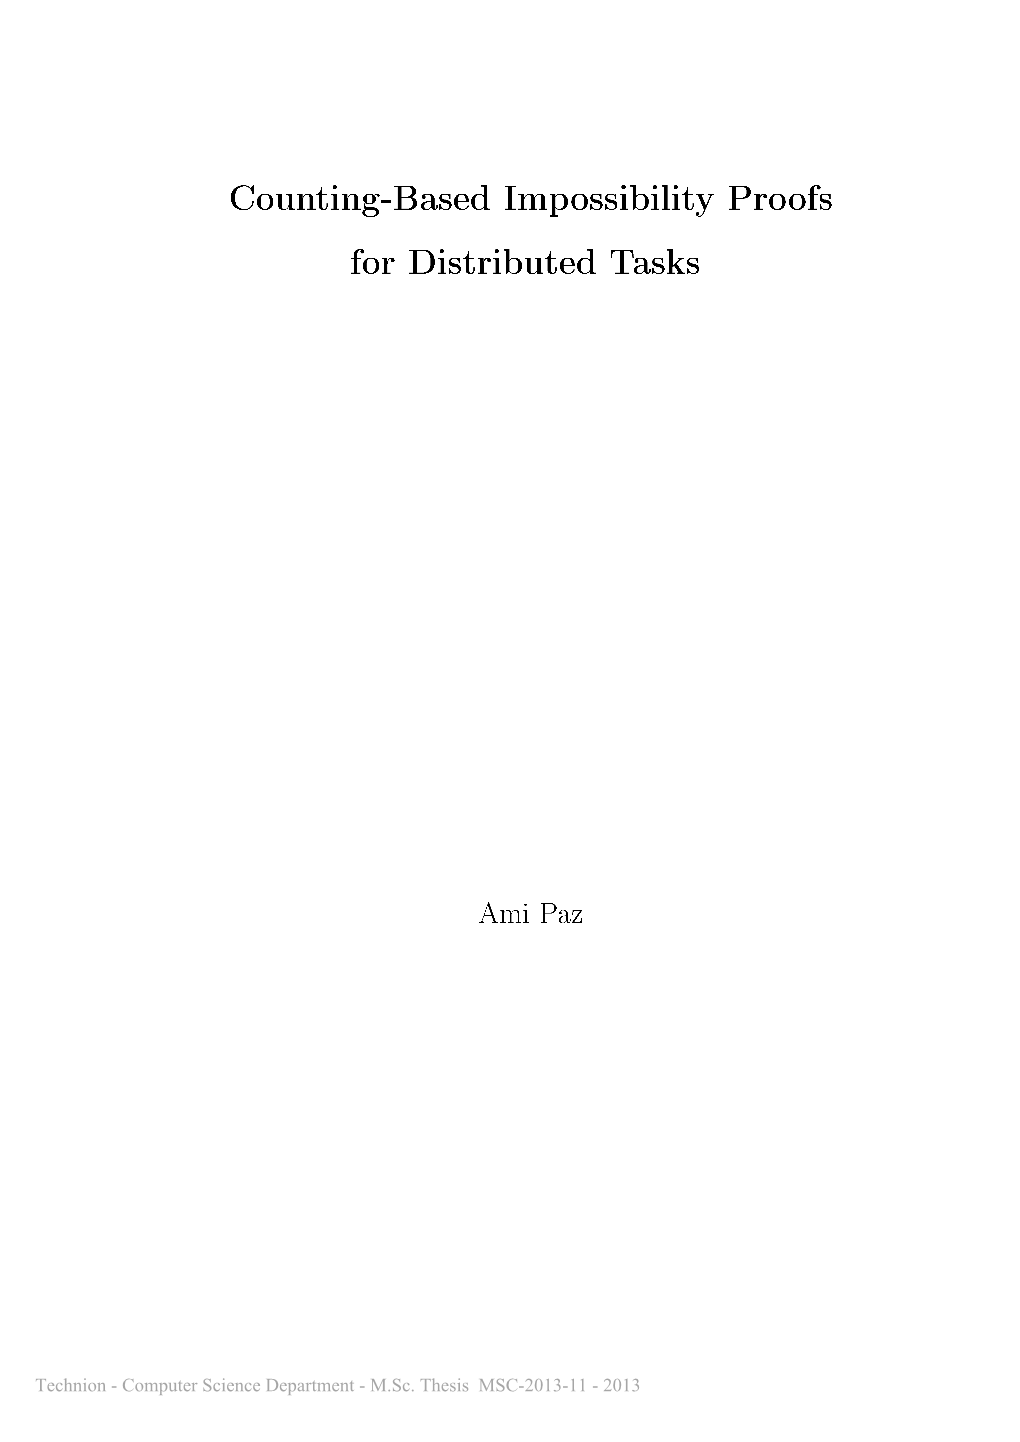 Counting-Based Impossibility Proofs for Distributed Tasks